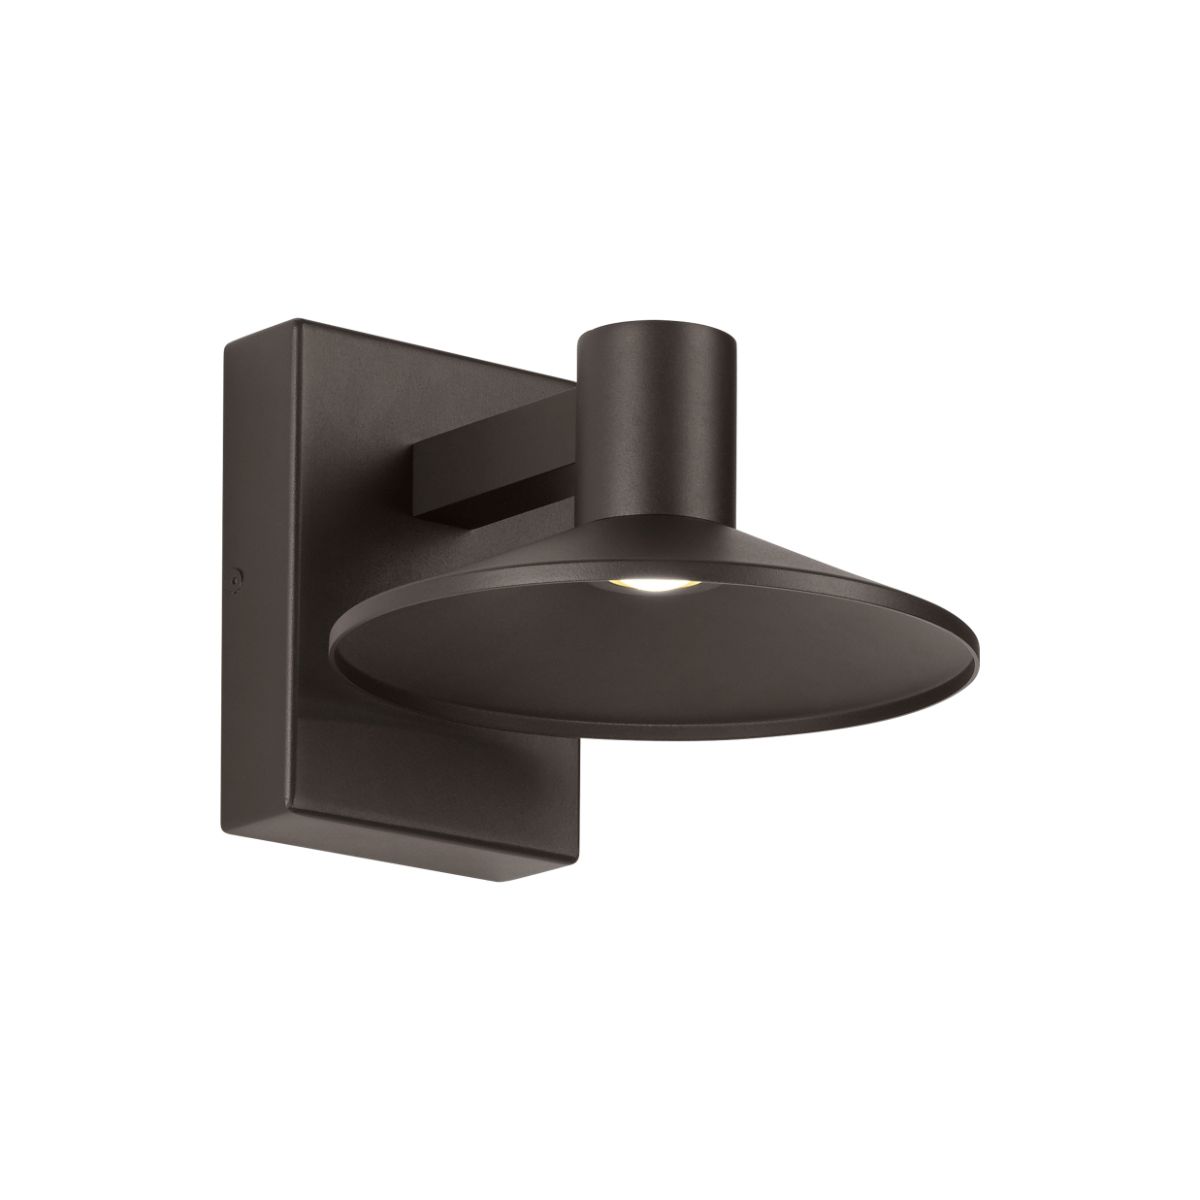 Ash 8 In. LED Hi-Output Outdoor Wall Sconce 1189 Lumens 2700K - Bees Lighting